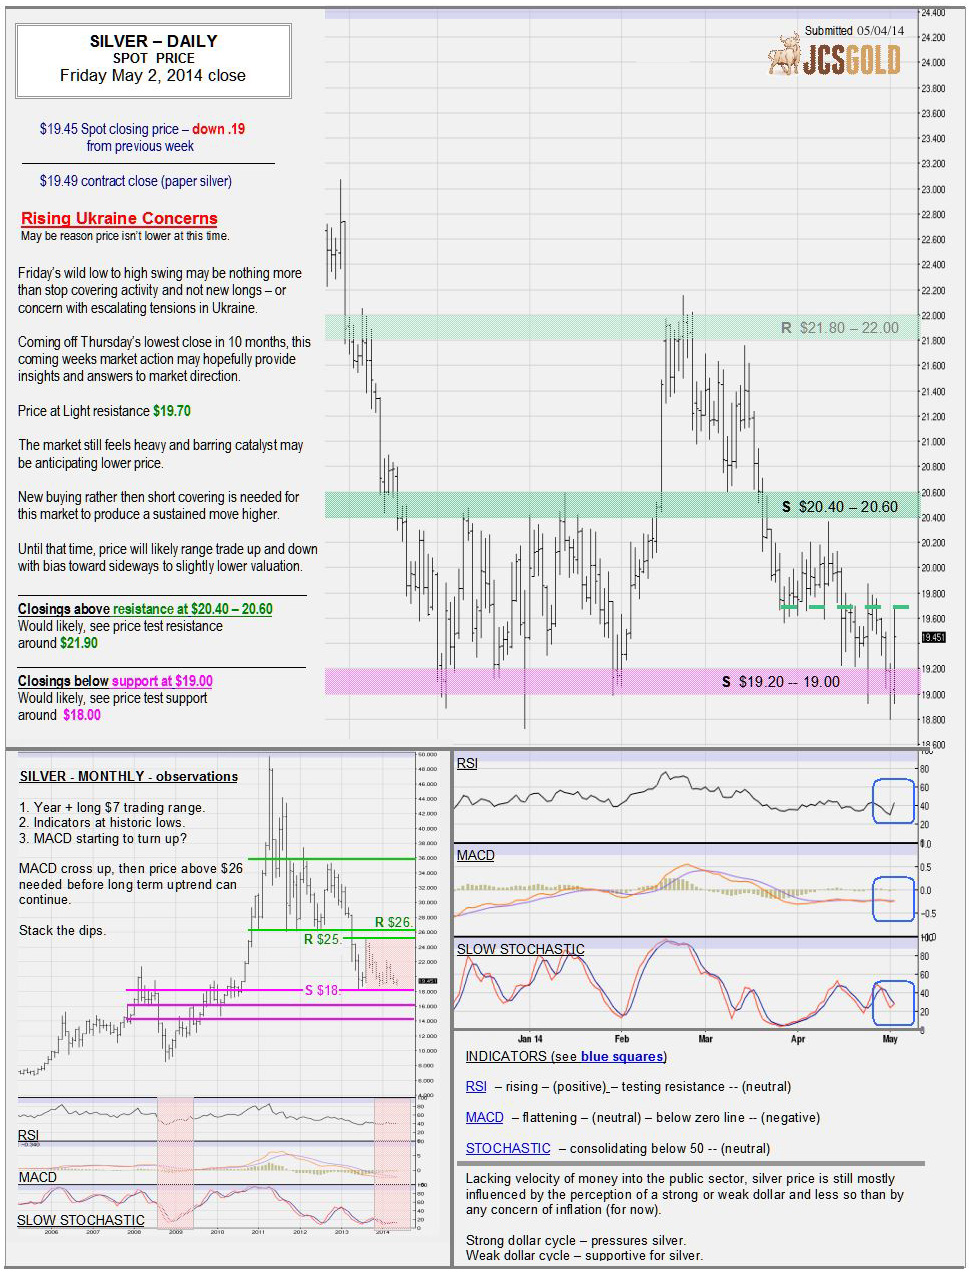 May 2, 2014 chart & commentary